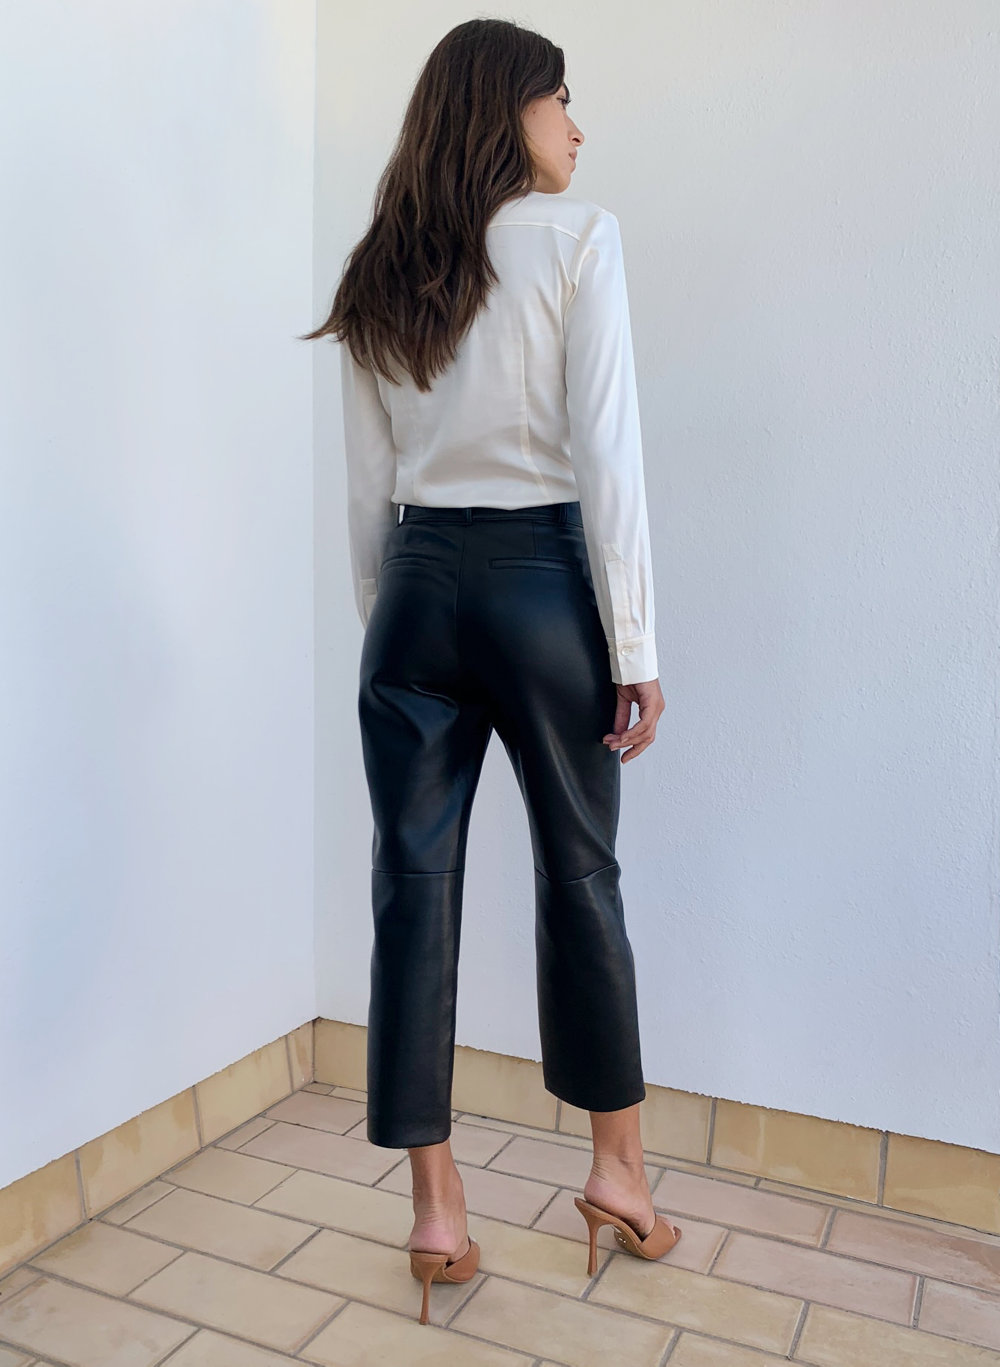 straight leather pants